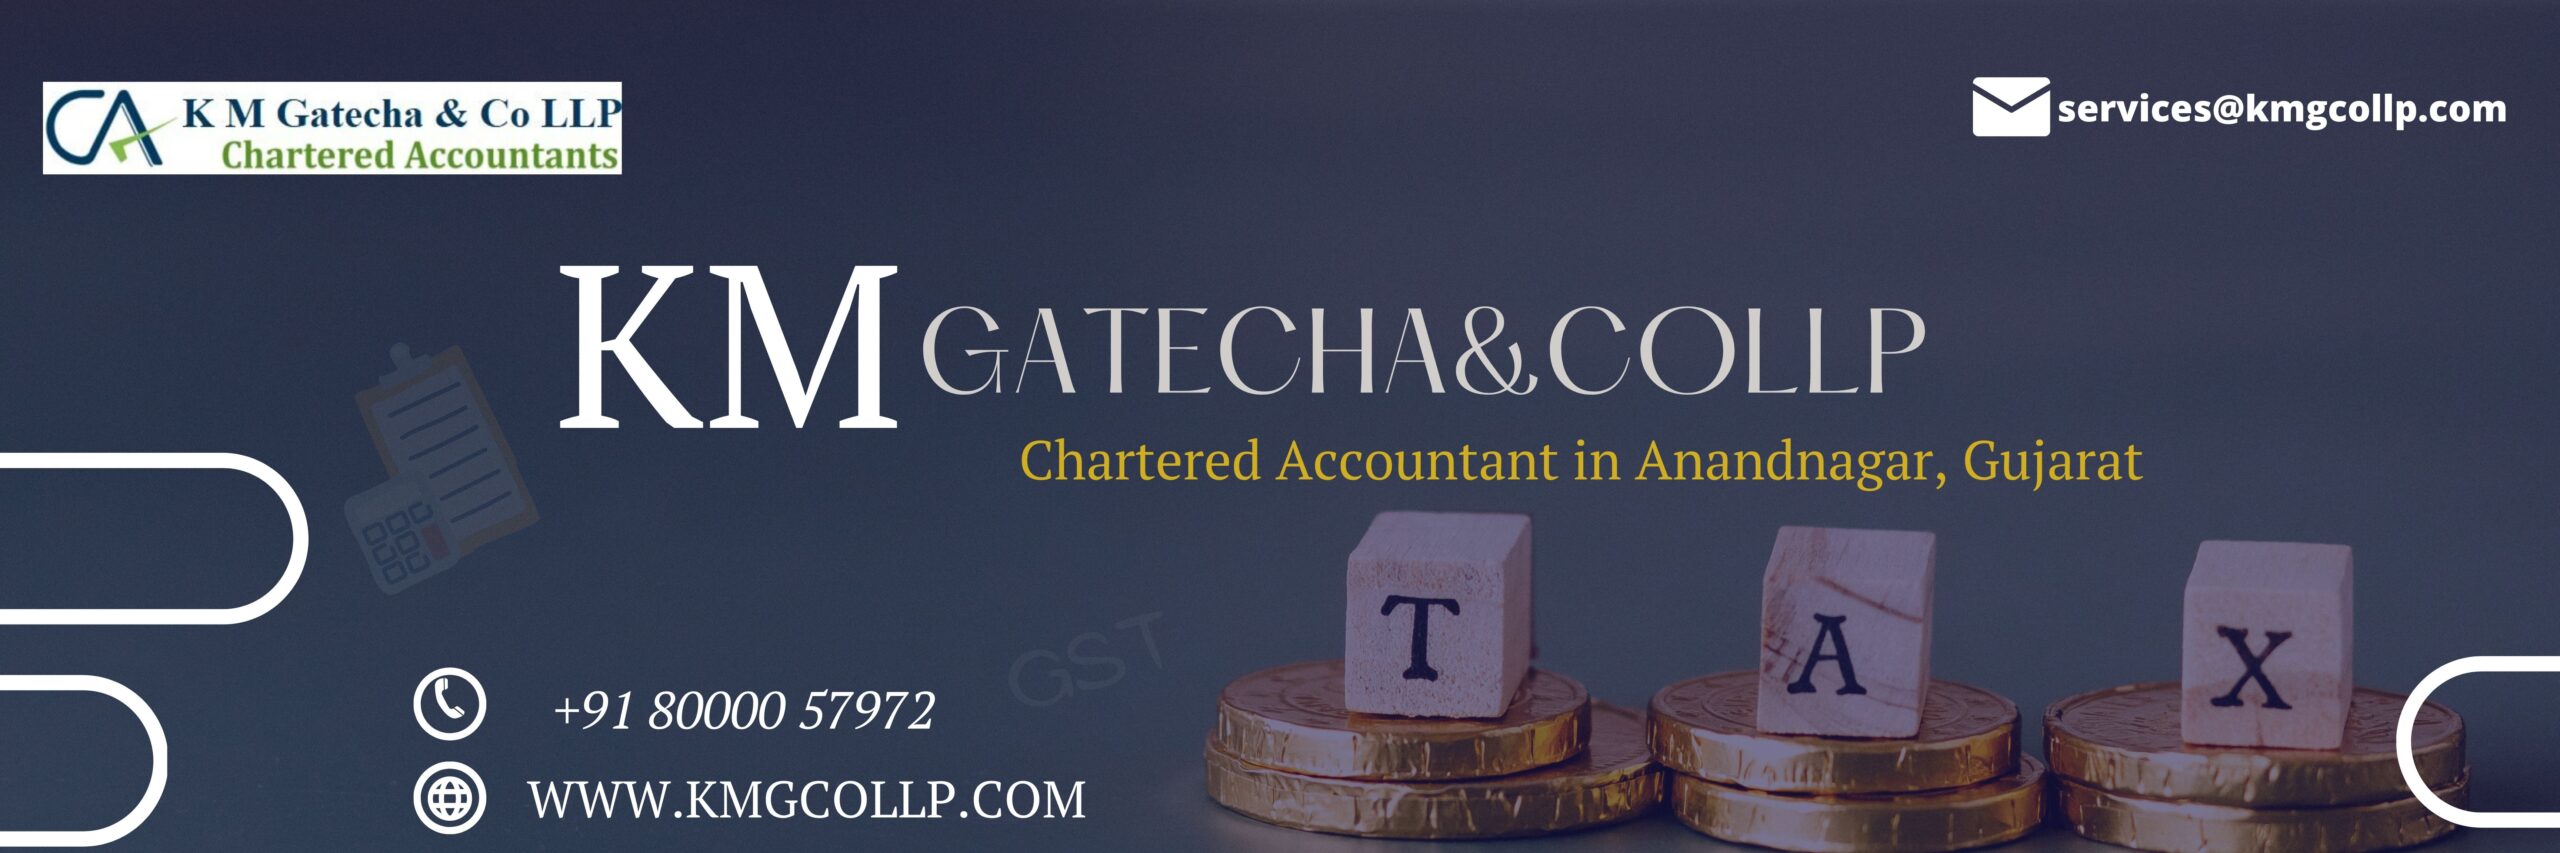 ca chartered accountant in anandnagar